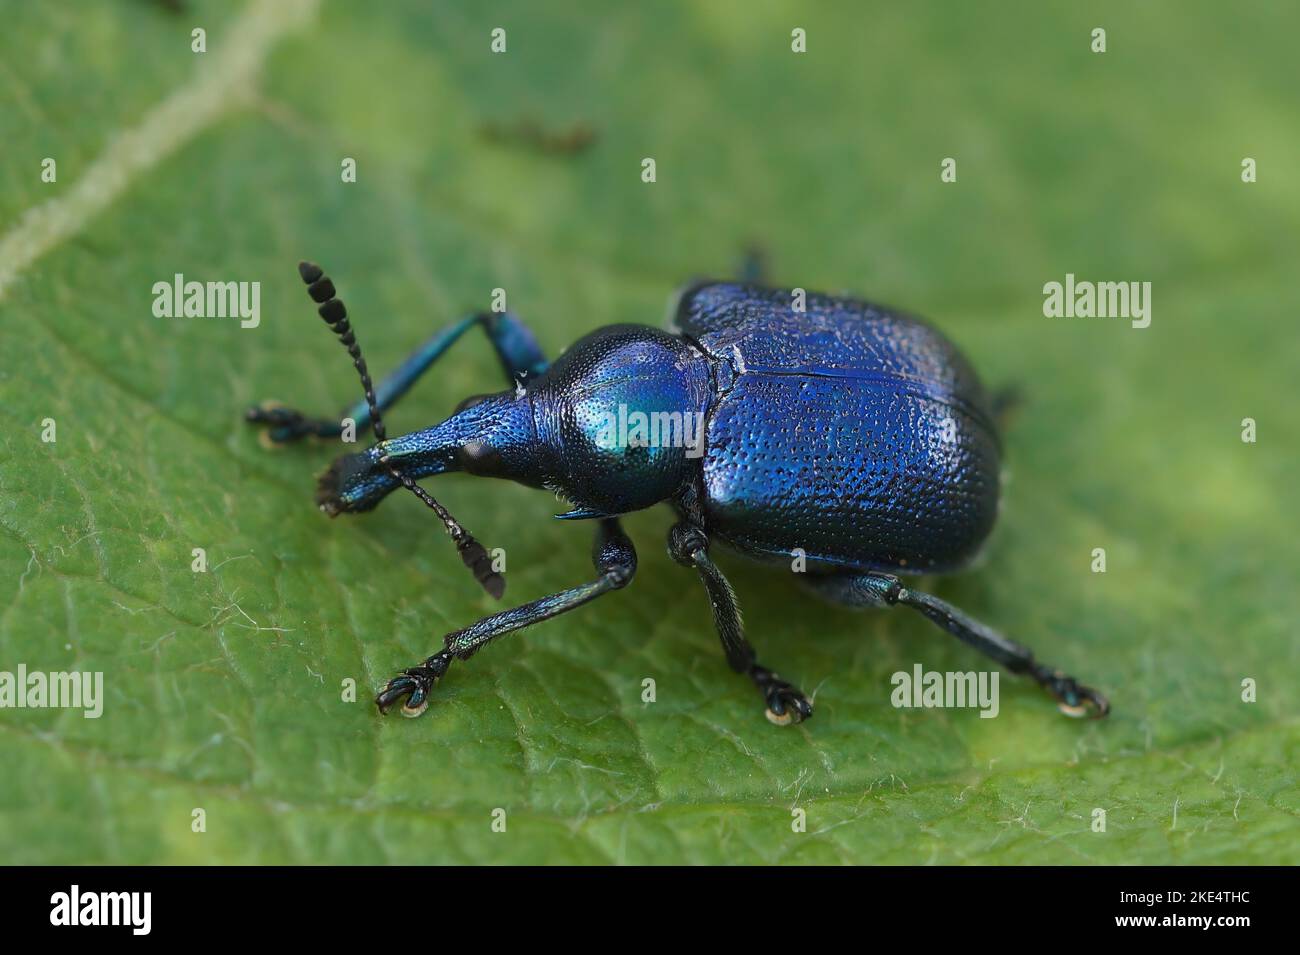 A closeup of a Byctiscus betulae weevil beetle sitting on a green leaf Stock Photo